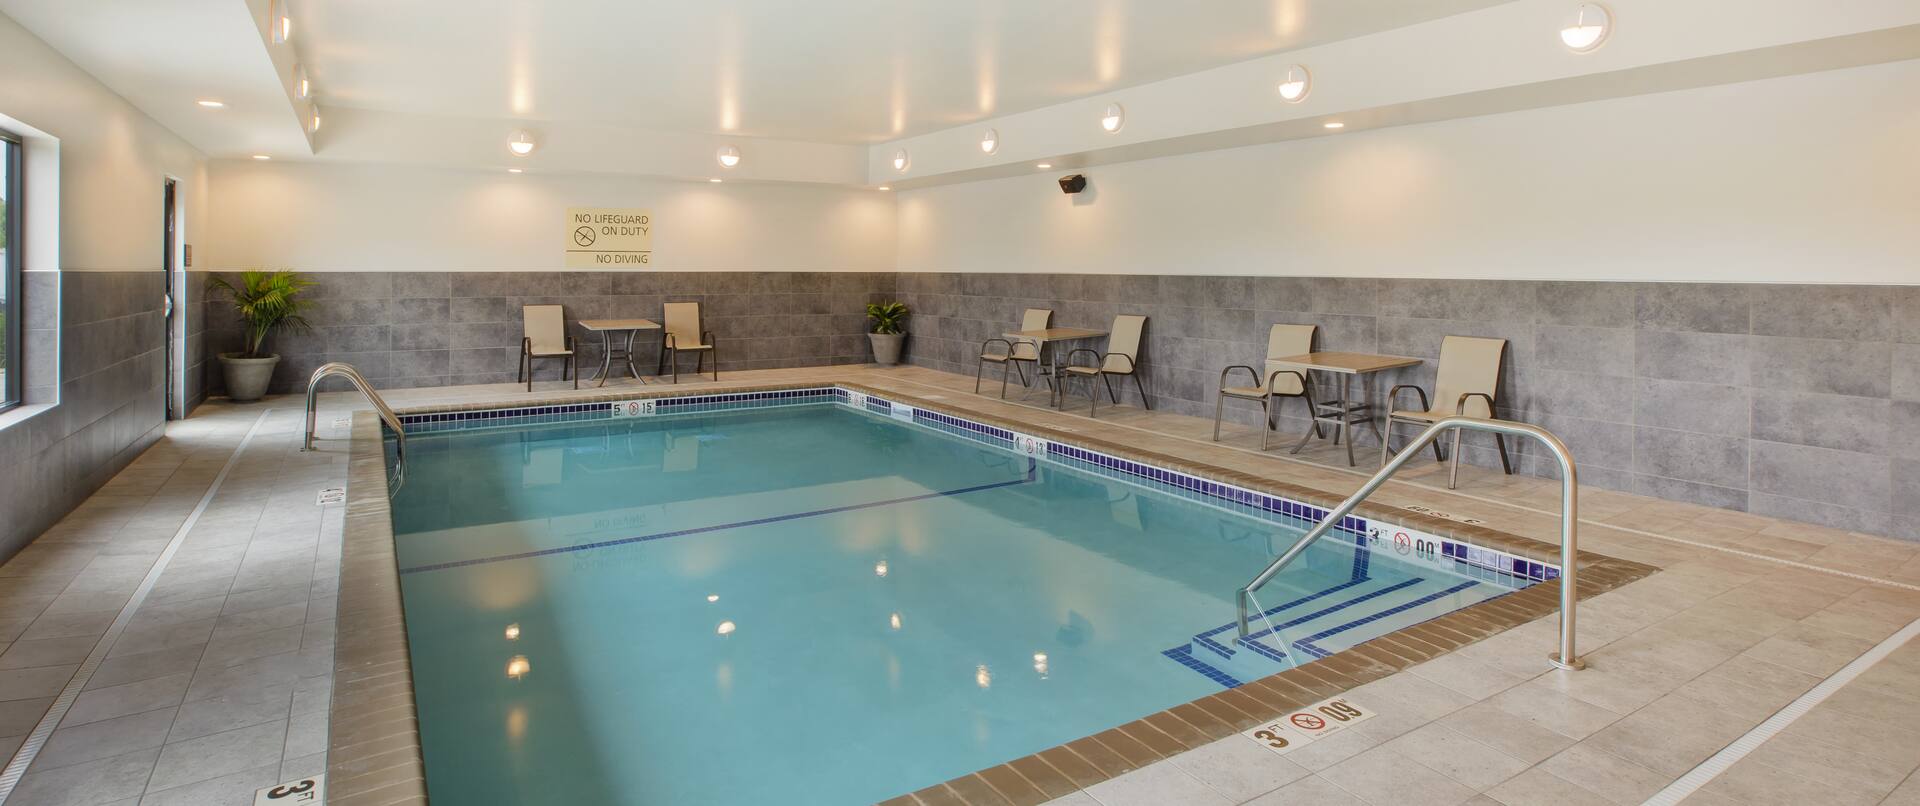 Indoor Pool with Tables and Chairs